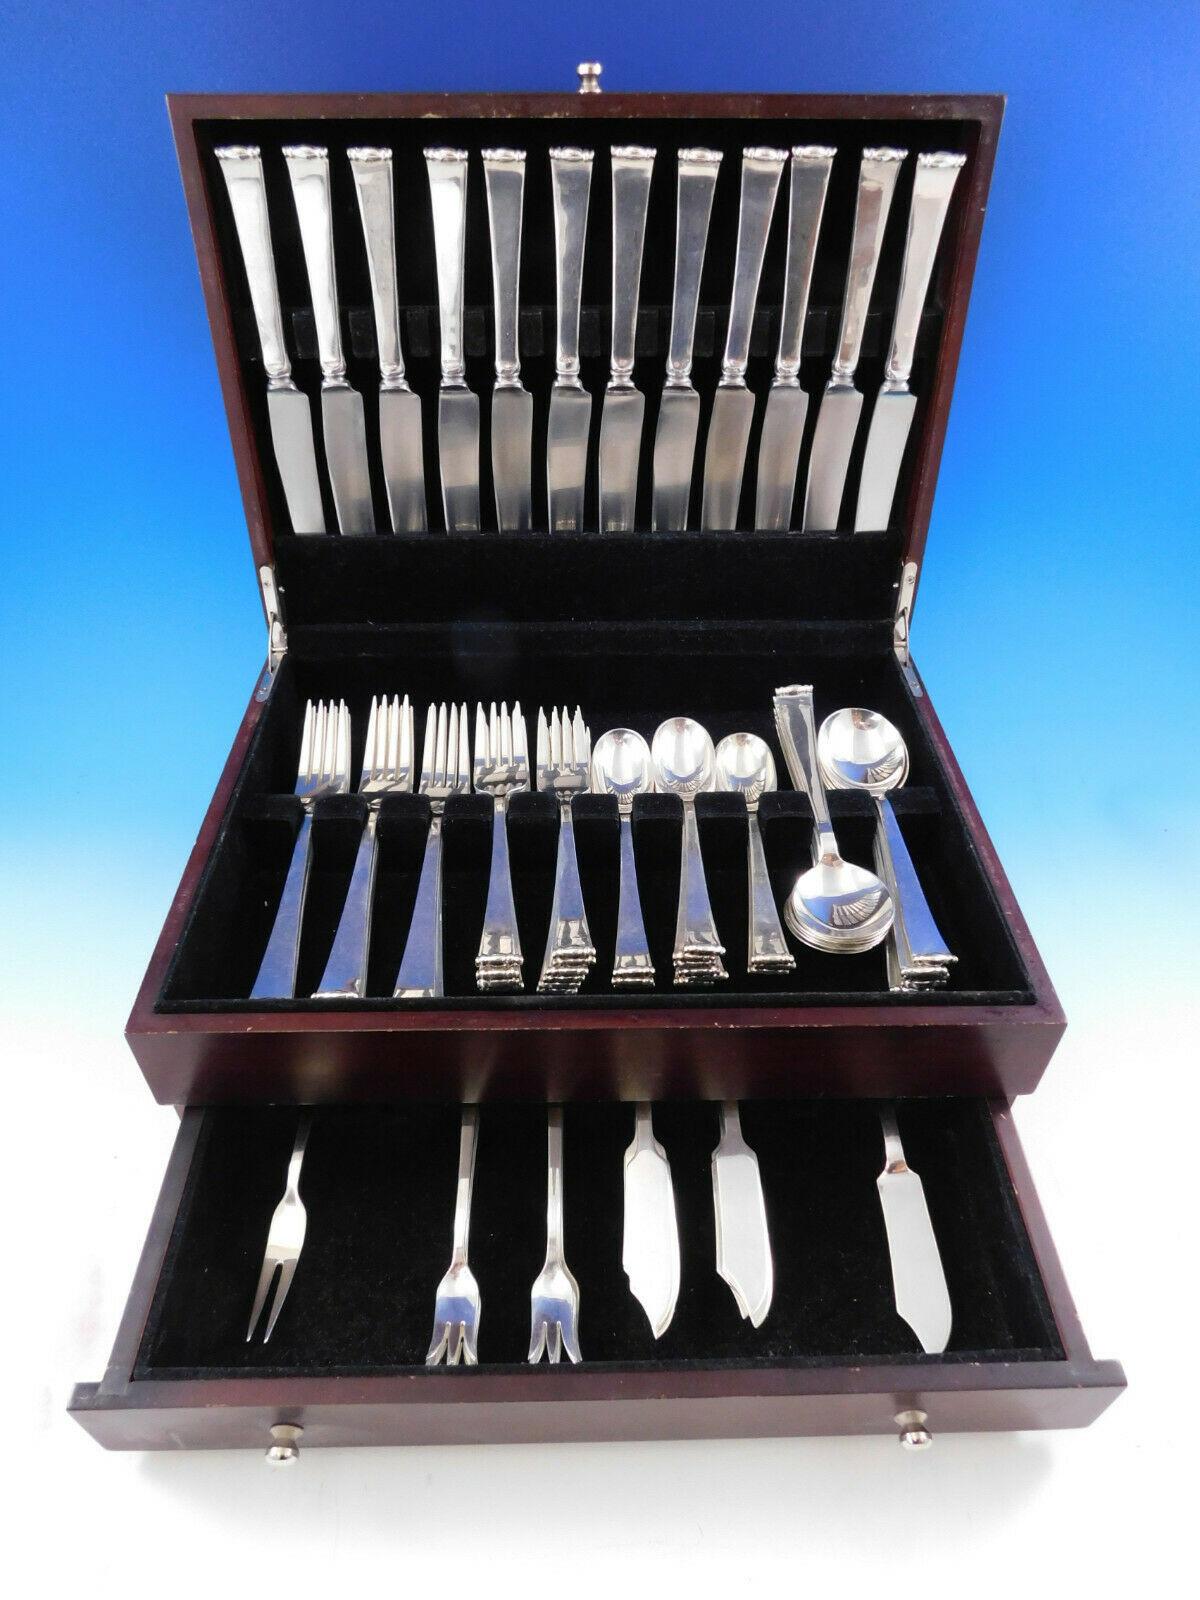 Modern Georgian by Allan Adler hand wrought sterling silver flatware set, 86 pieces. This set includes:

12 dinner knives, solid handles, 9 5/8